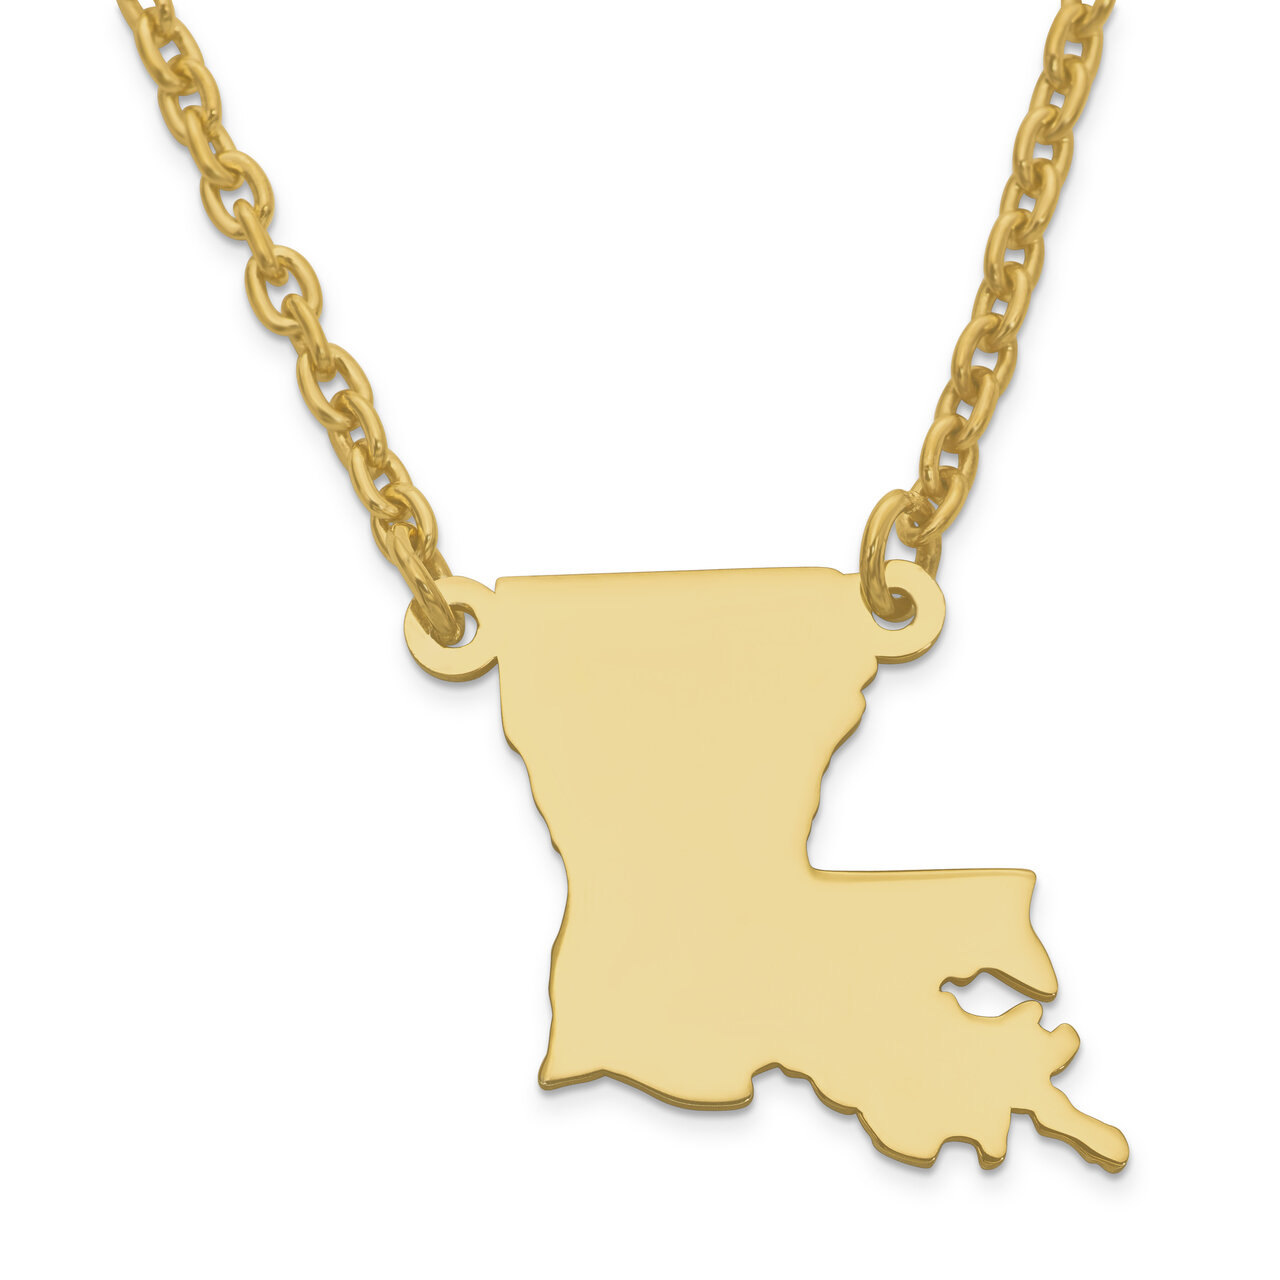 Louisiana State Pendant Necklace with Chain 14k Yellow Gold Engravable XNA706Y-LA